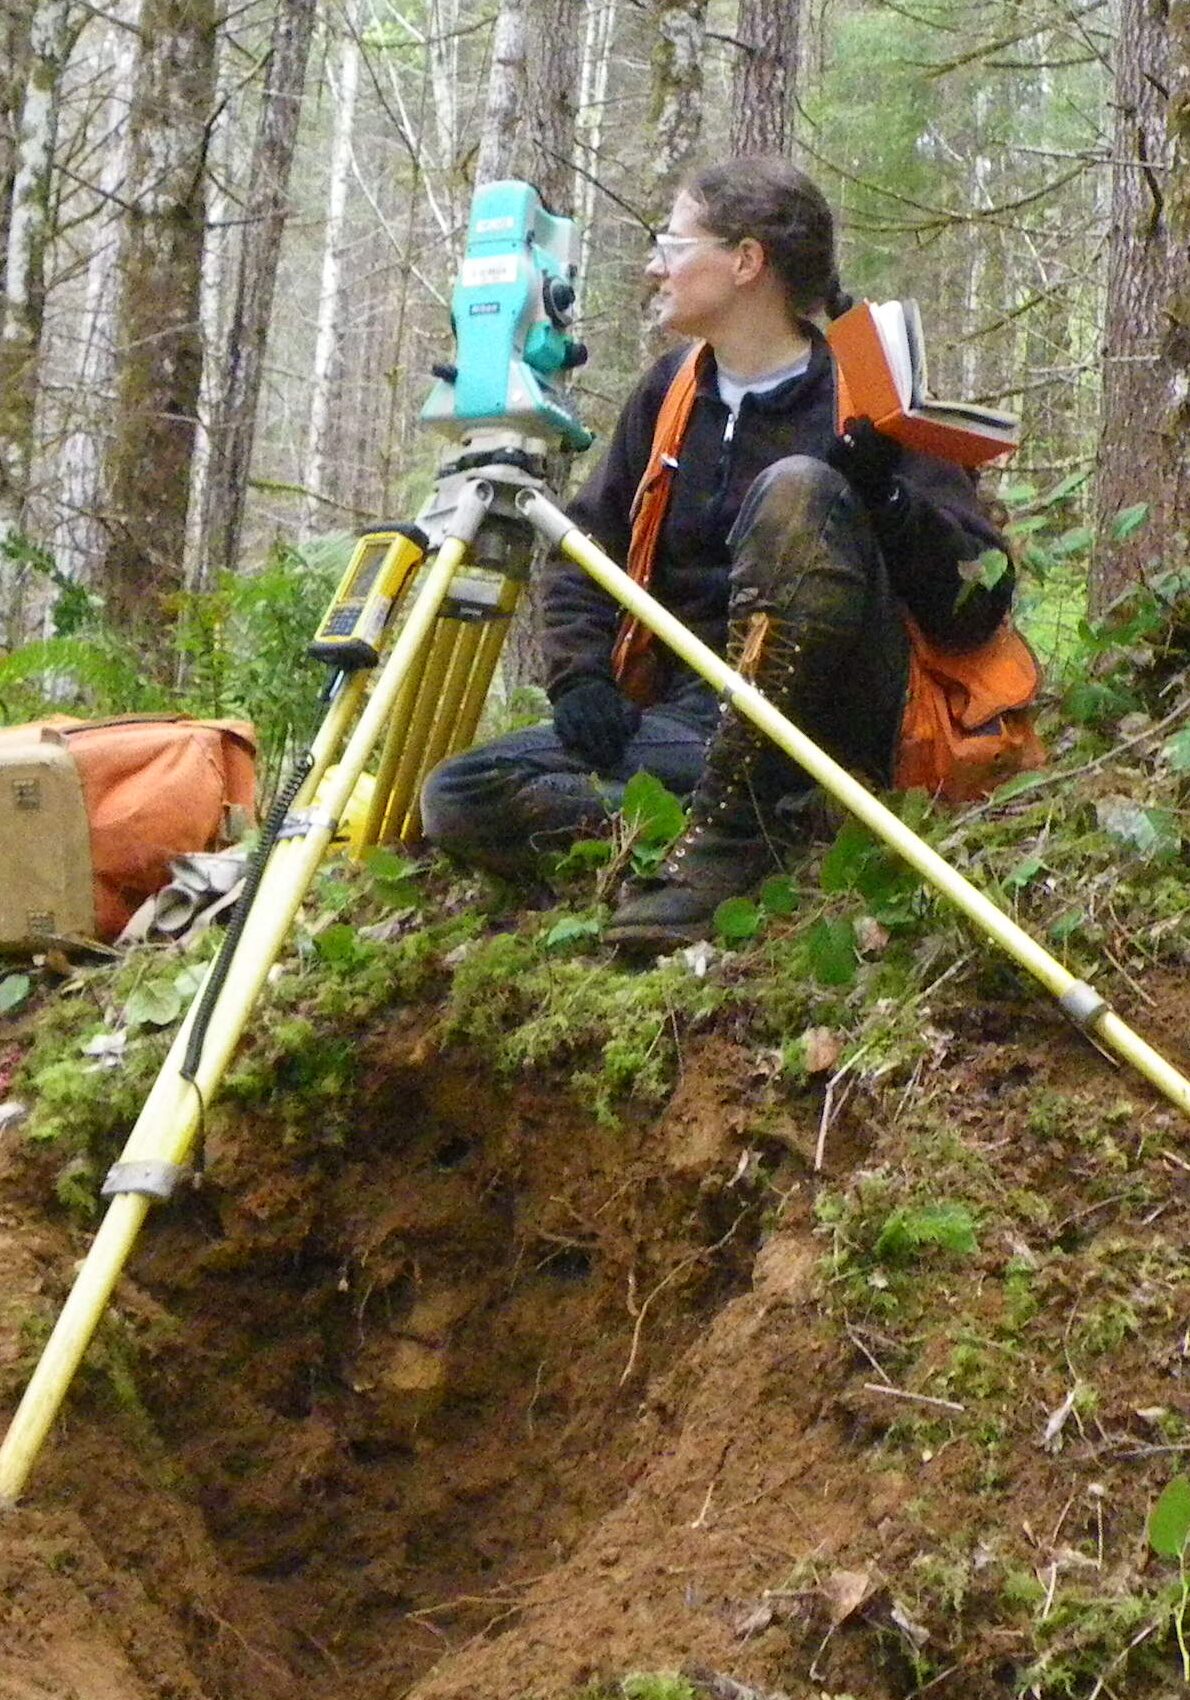 A woman sitting on the ground with a surveying equipment.